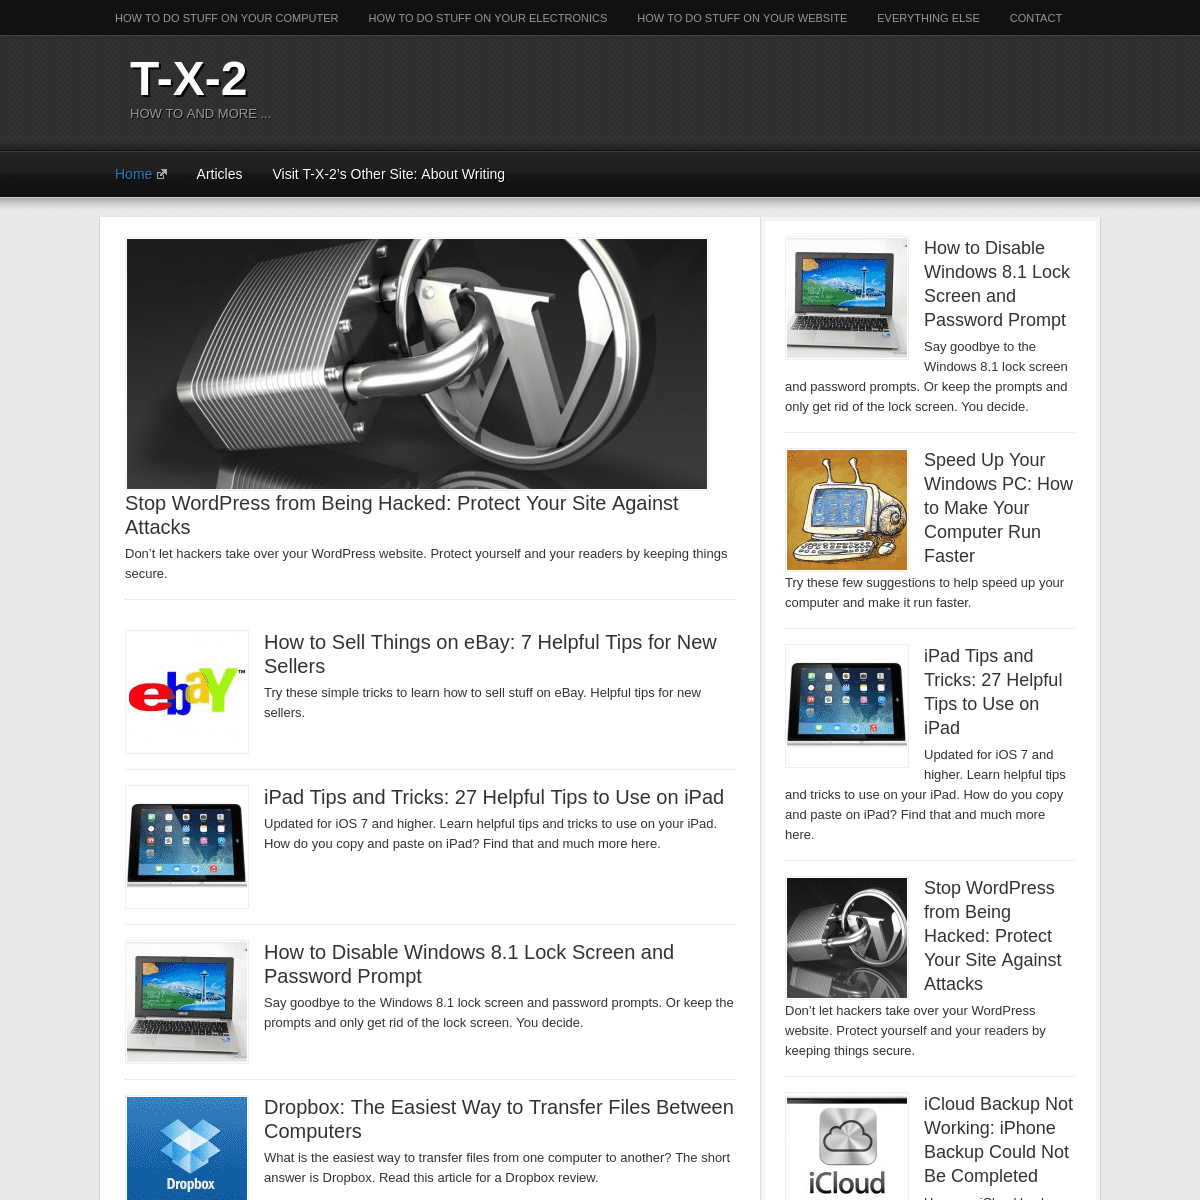 T-X-2 | How to and more ...